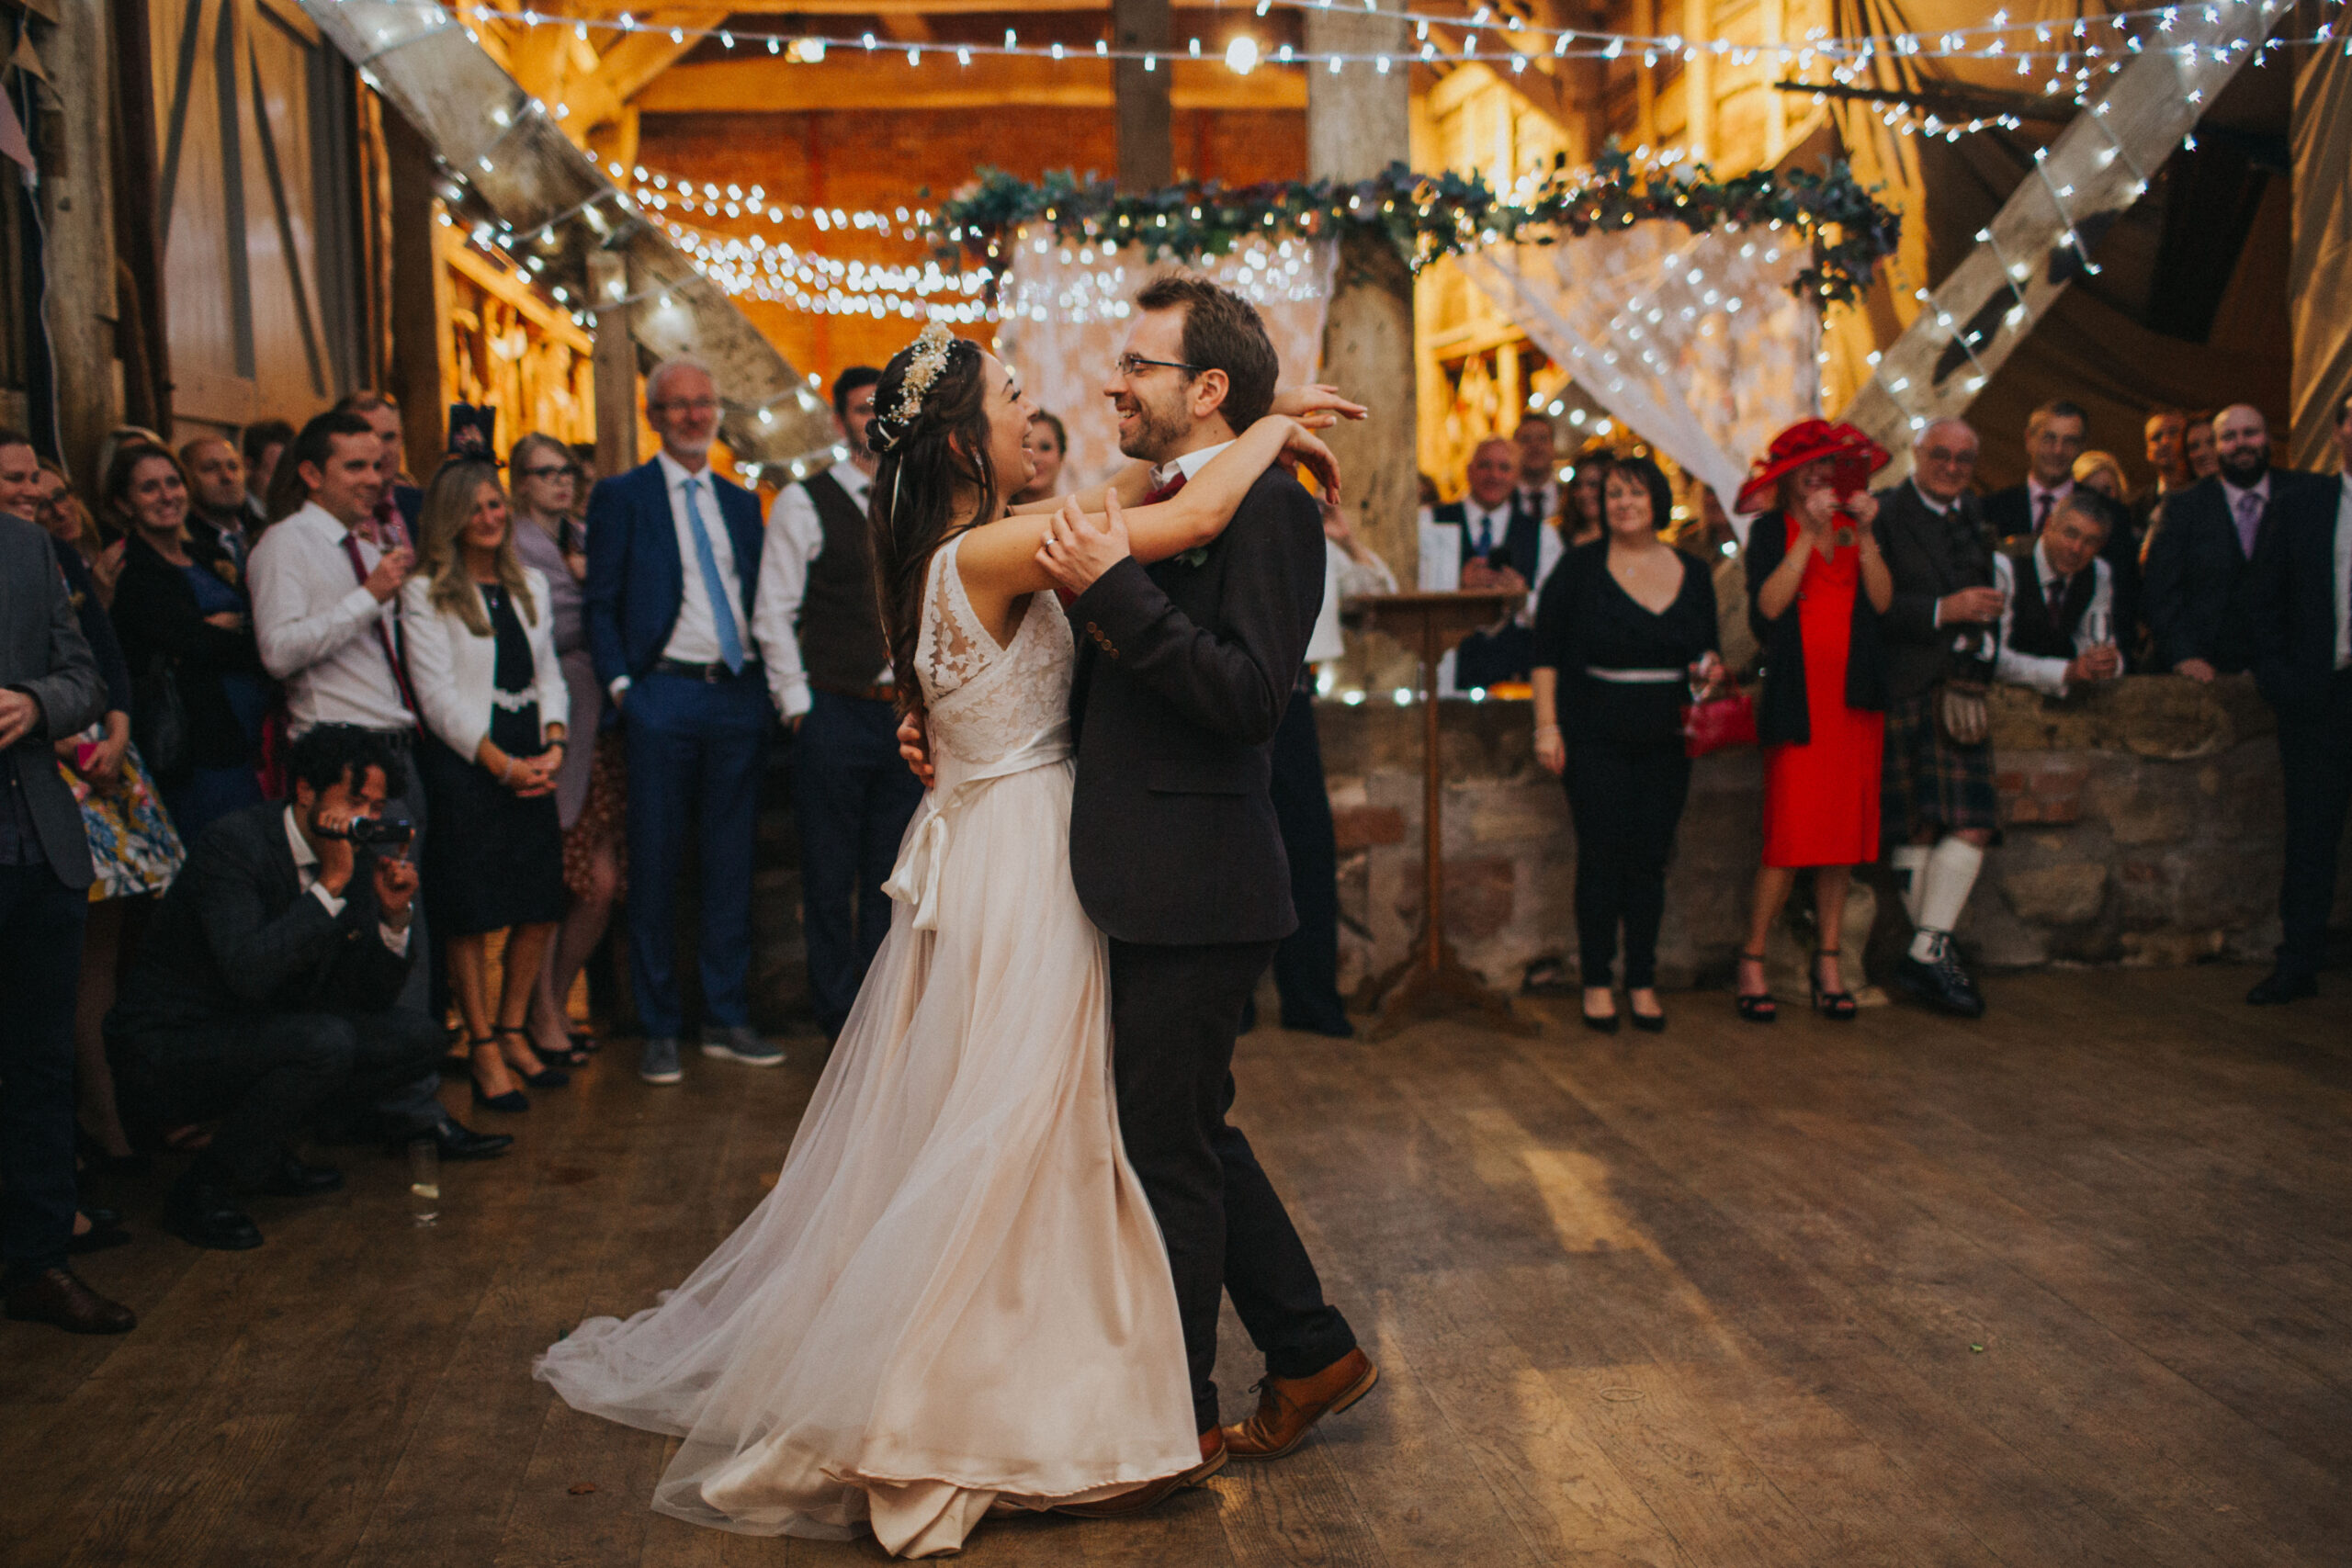 Bride and groom's first dance in the warm tones of fall